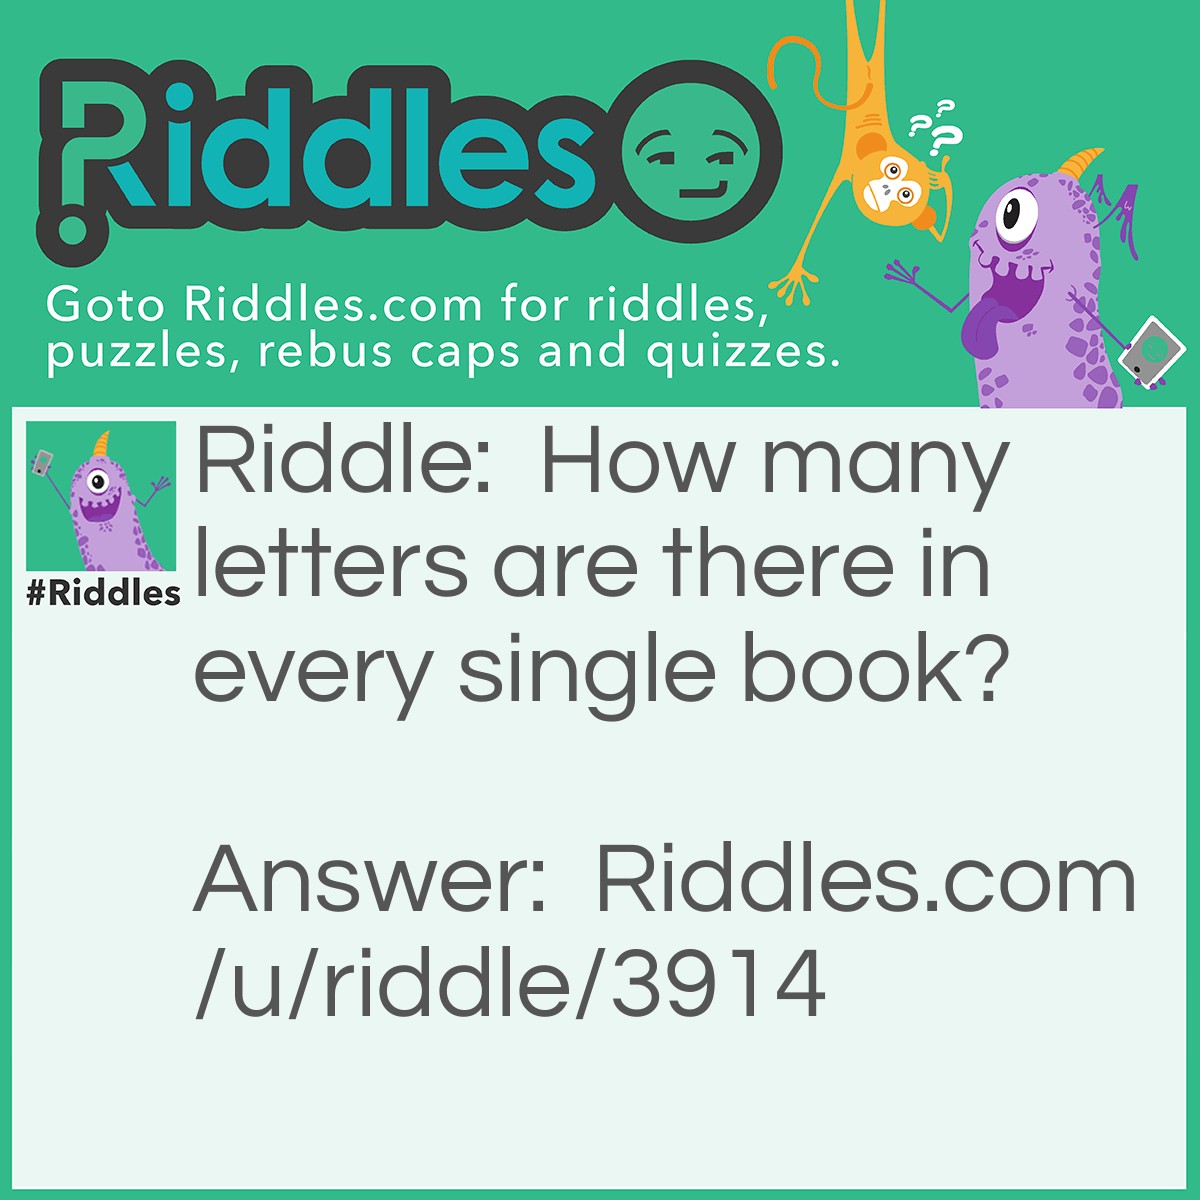 Riddle: How many letters are there in every single book? Answer: Twelve!